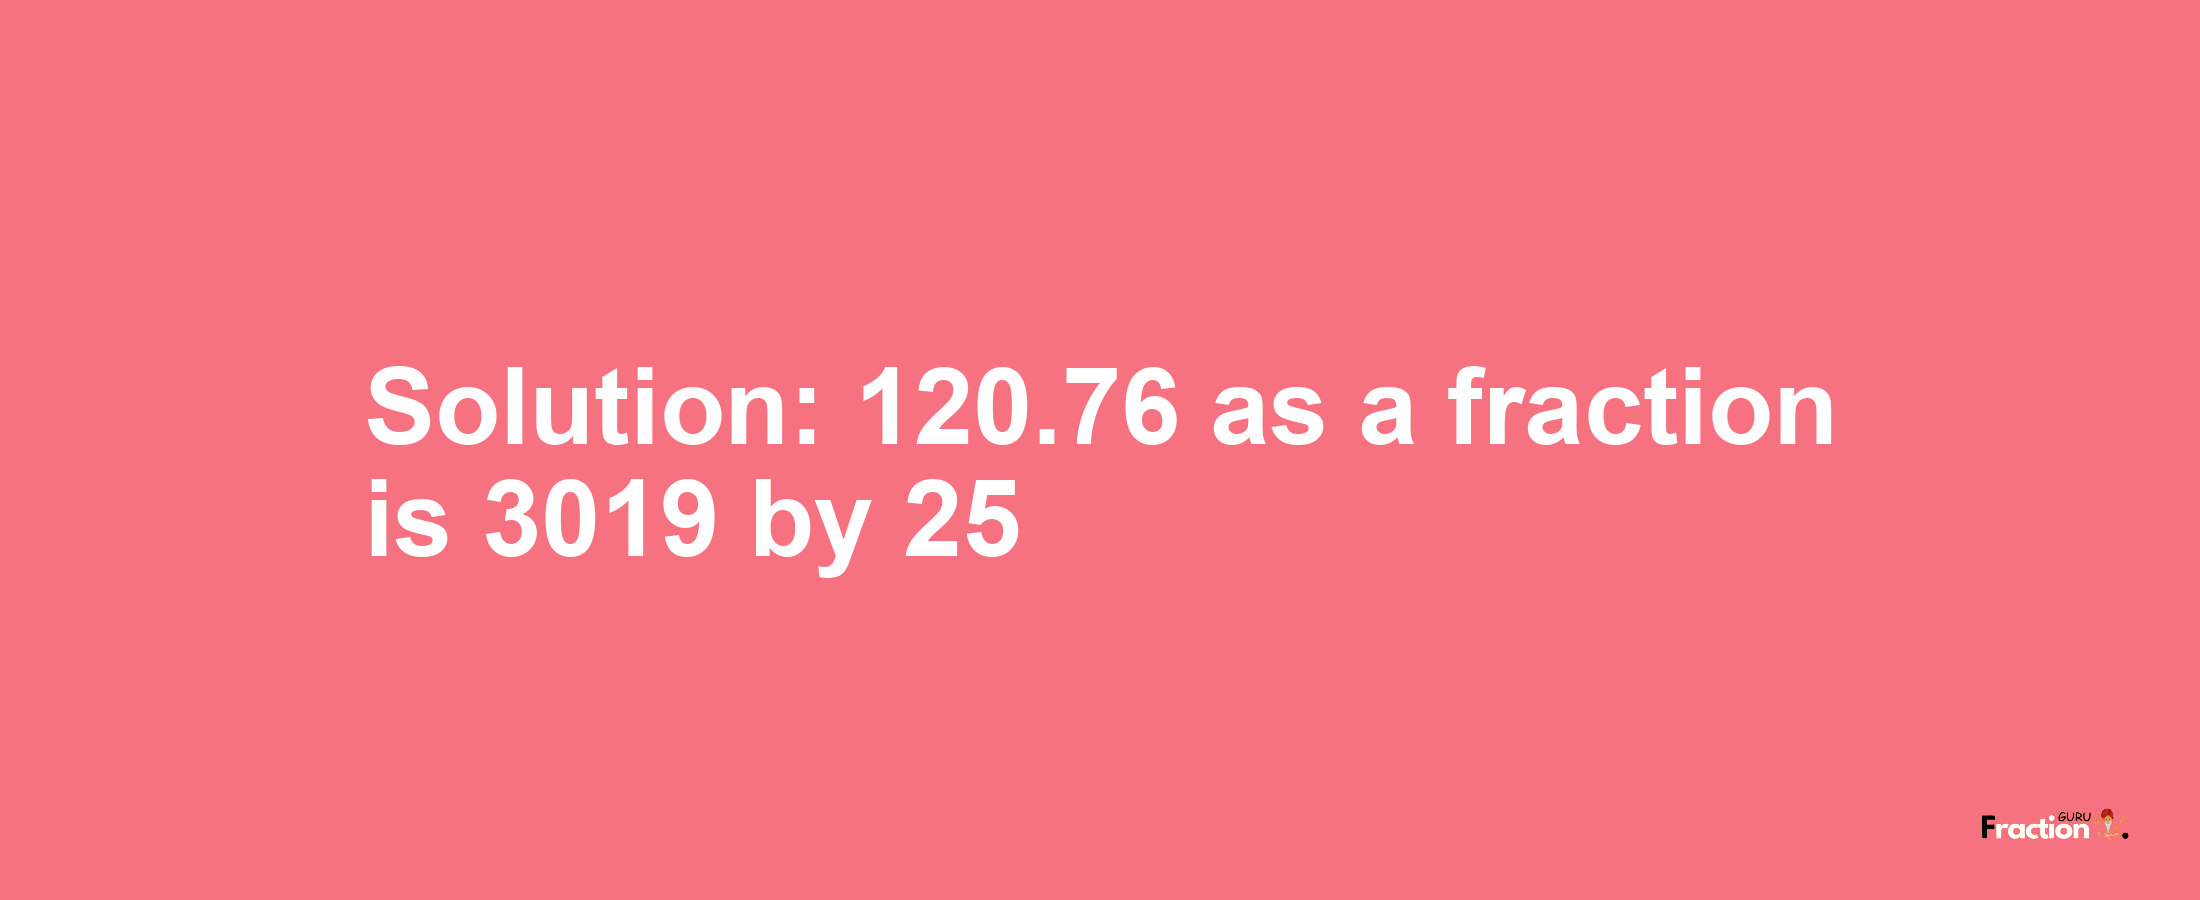 Solution:120.76 as a fraction is 3019/25